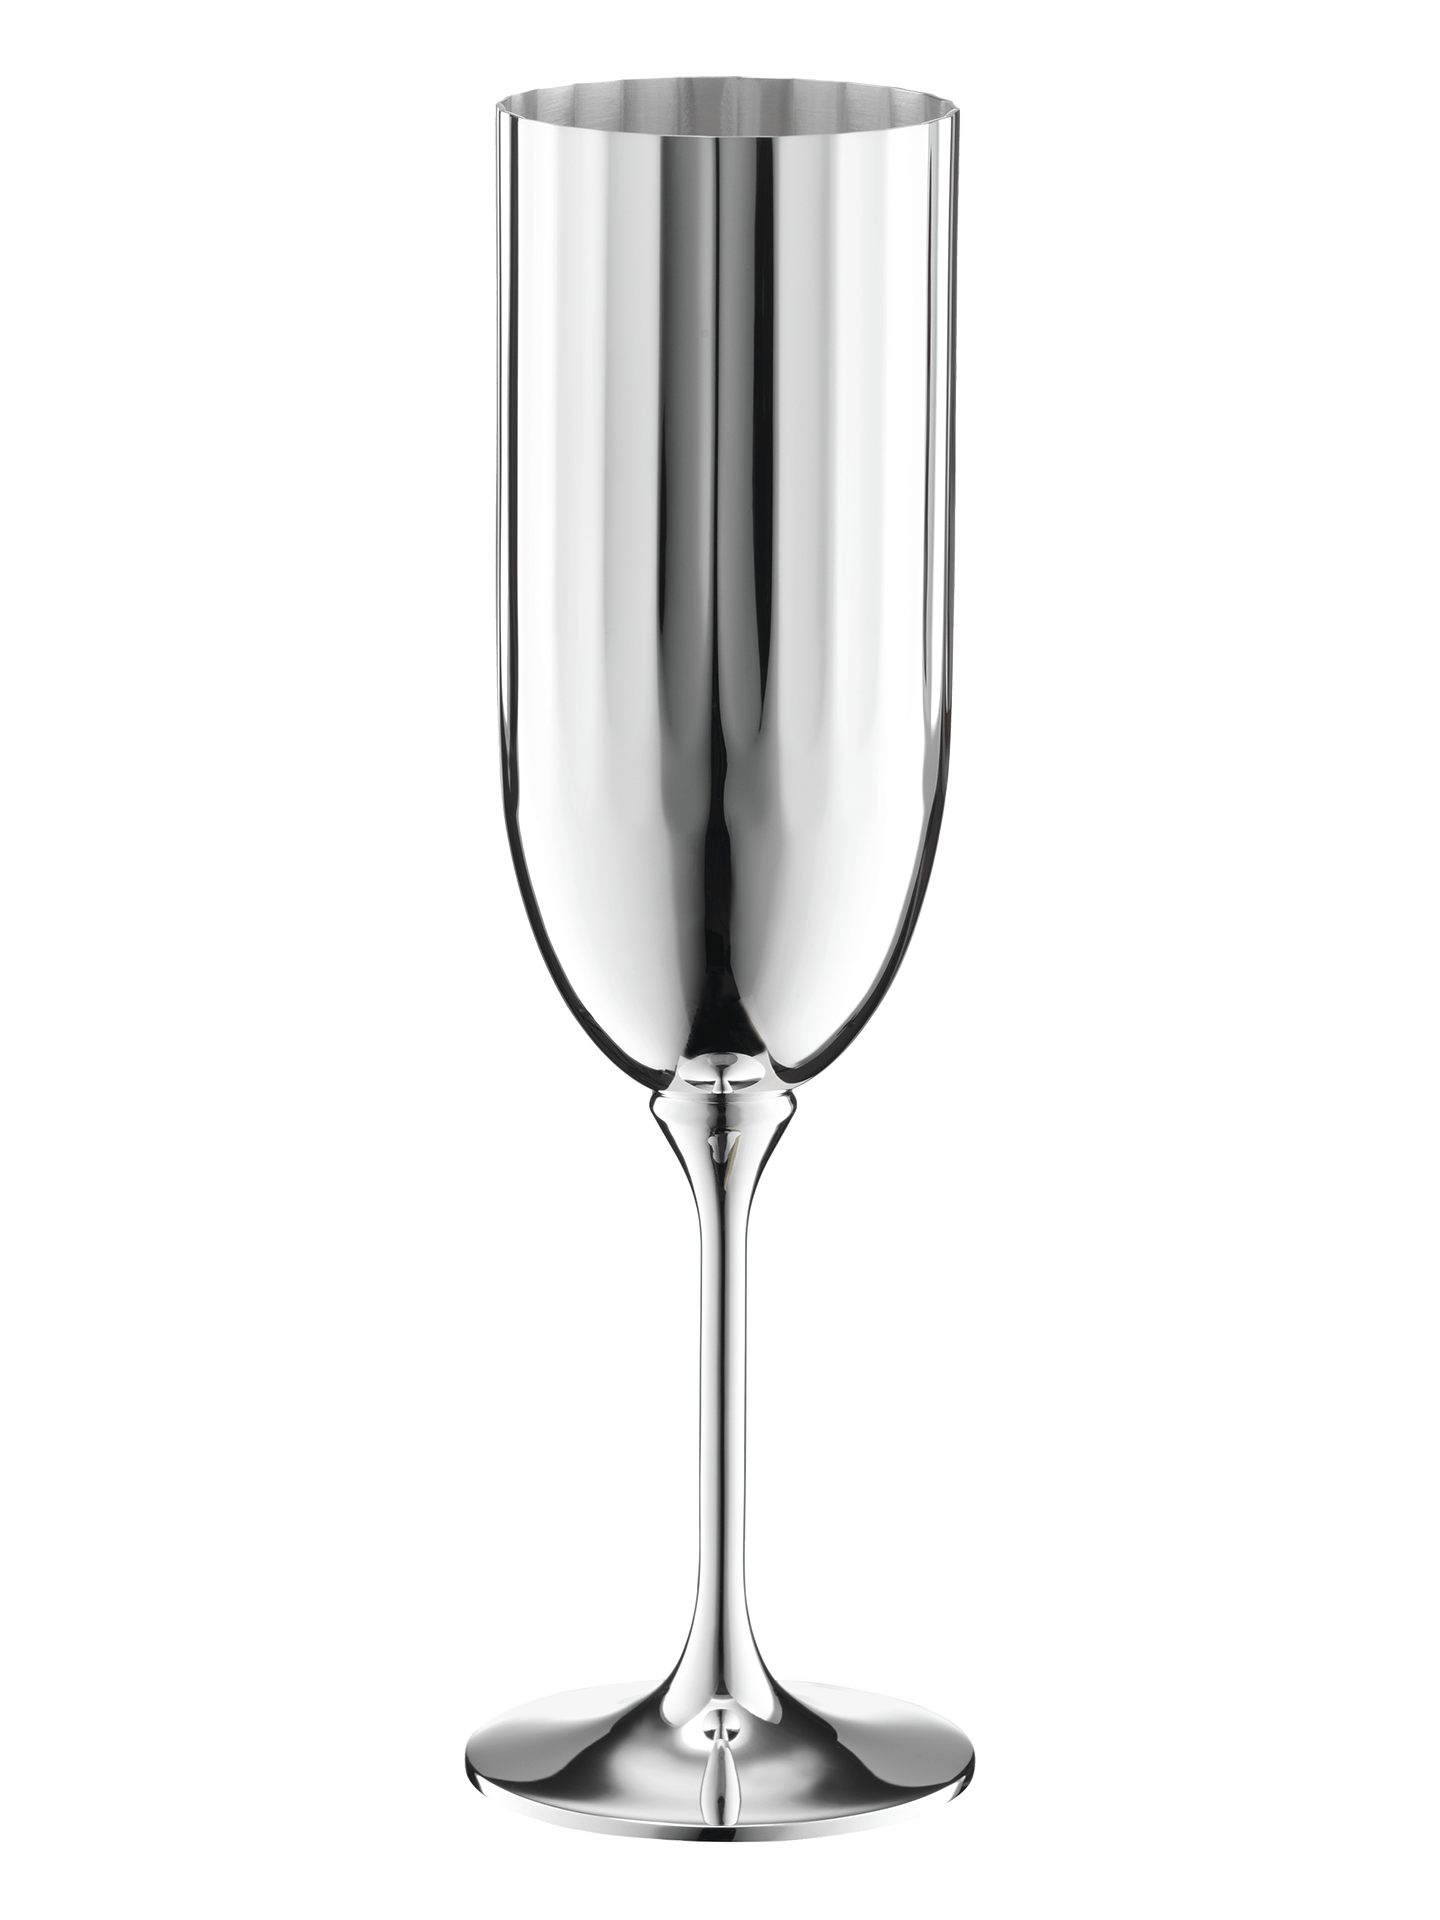 Belvedere Champagne flute (90g silverplated)